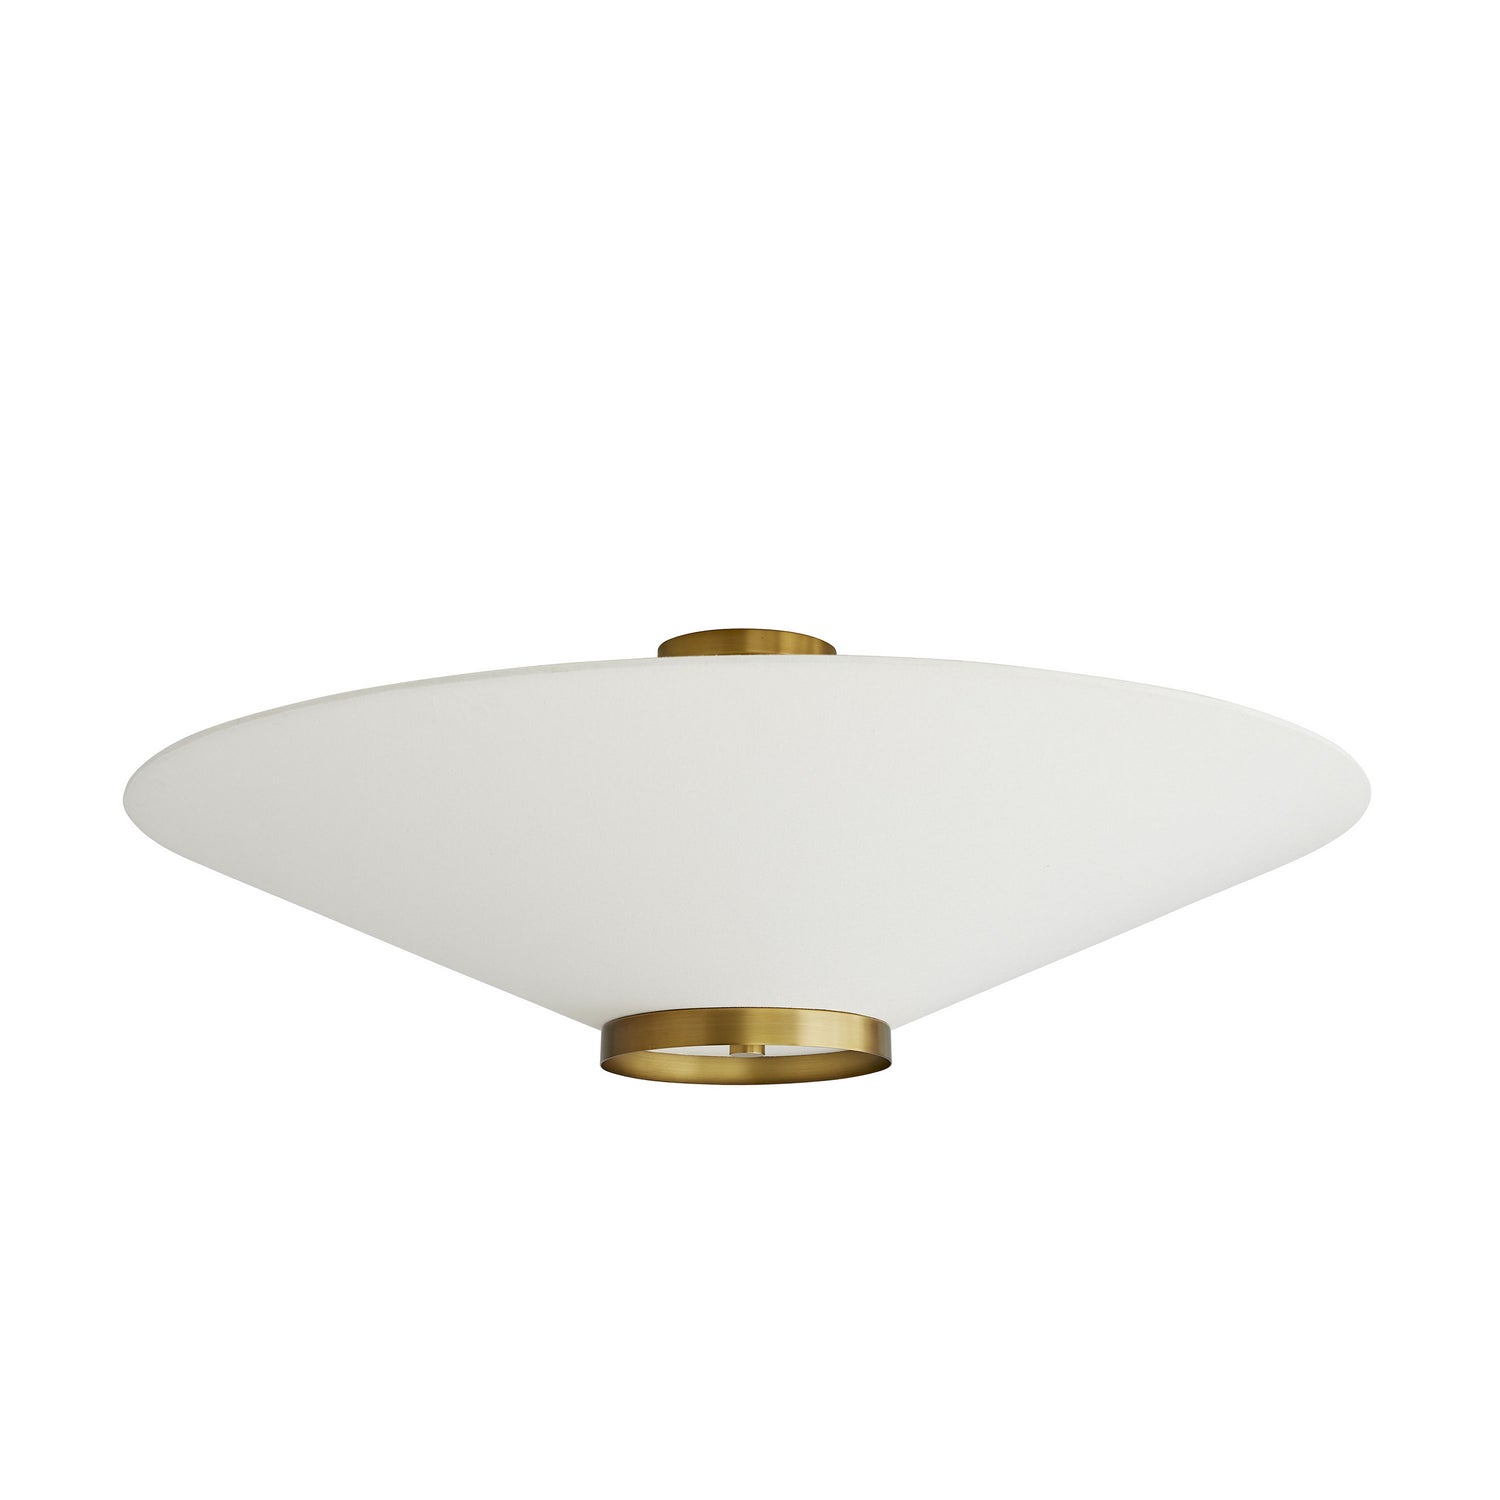 Three Light Flush Mount from the Decker collection in Antique Brass finish